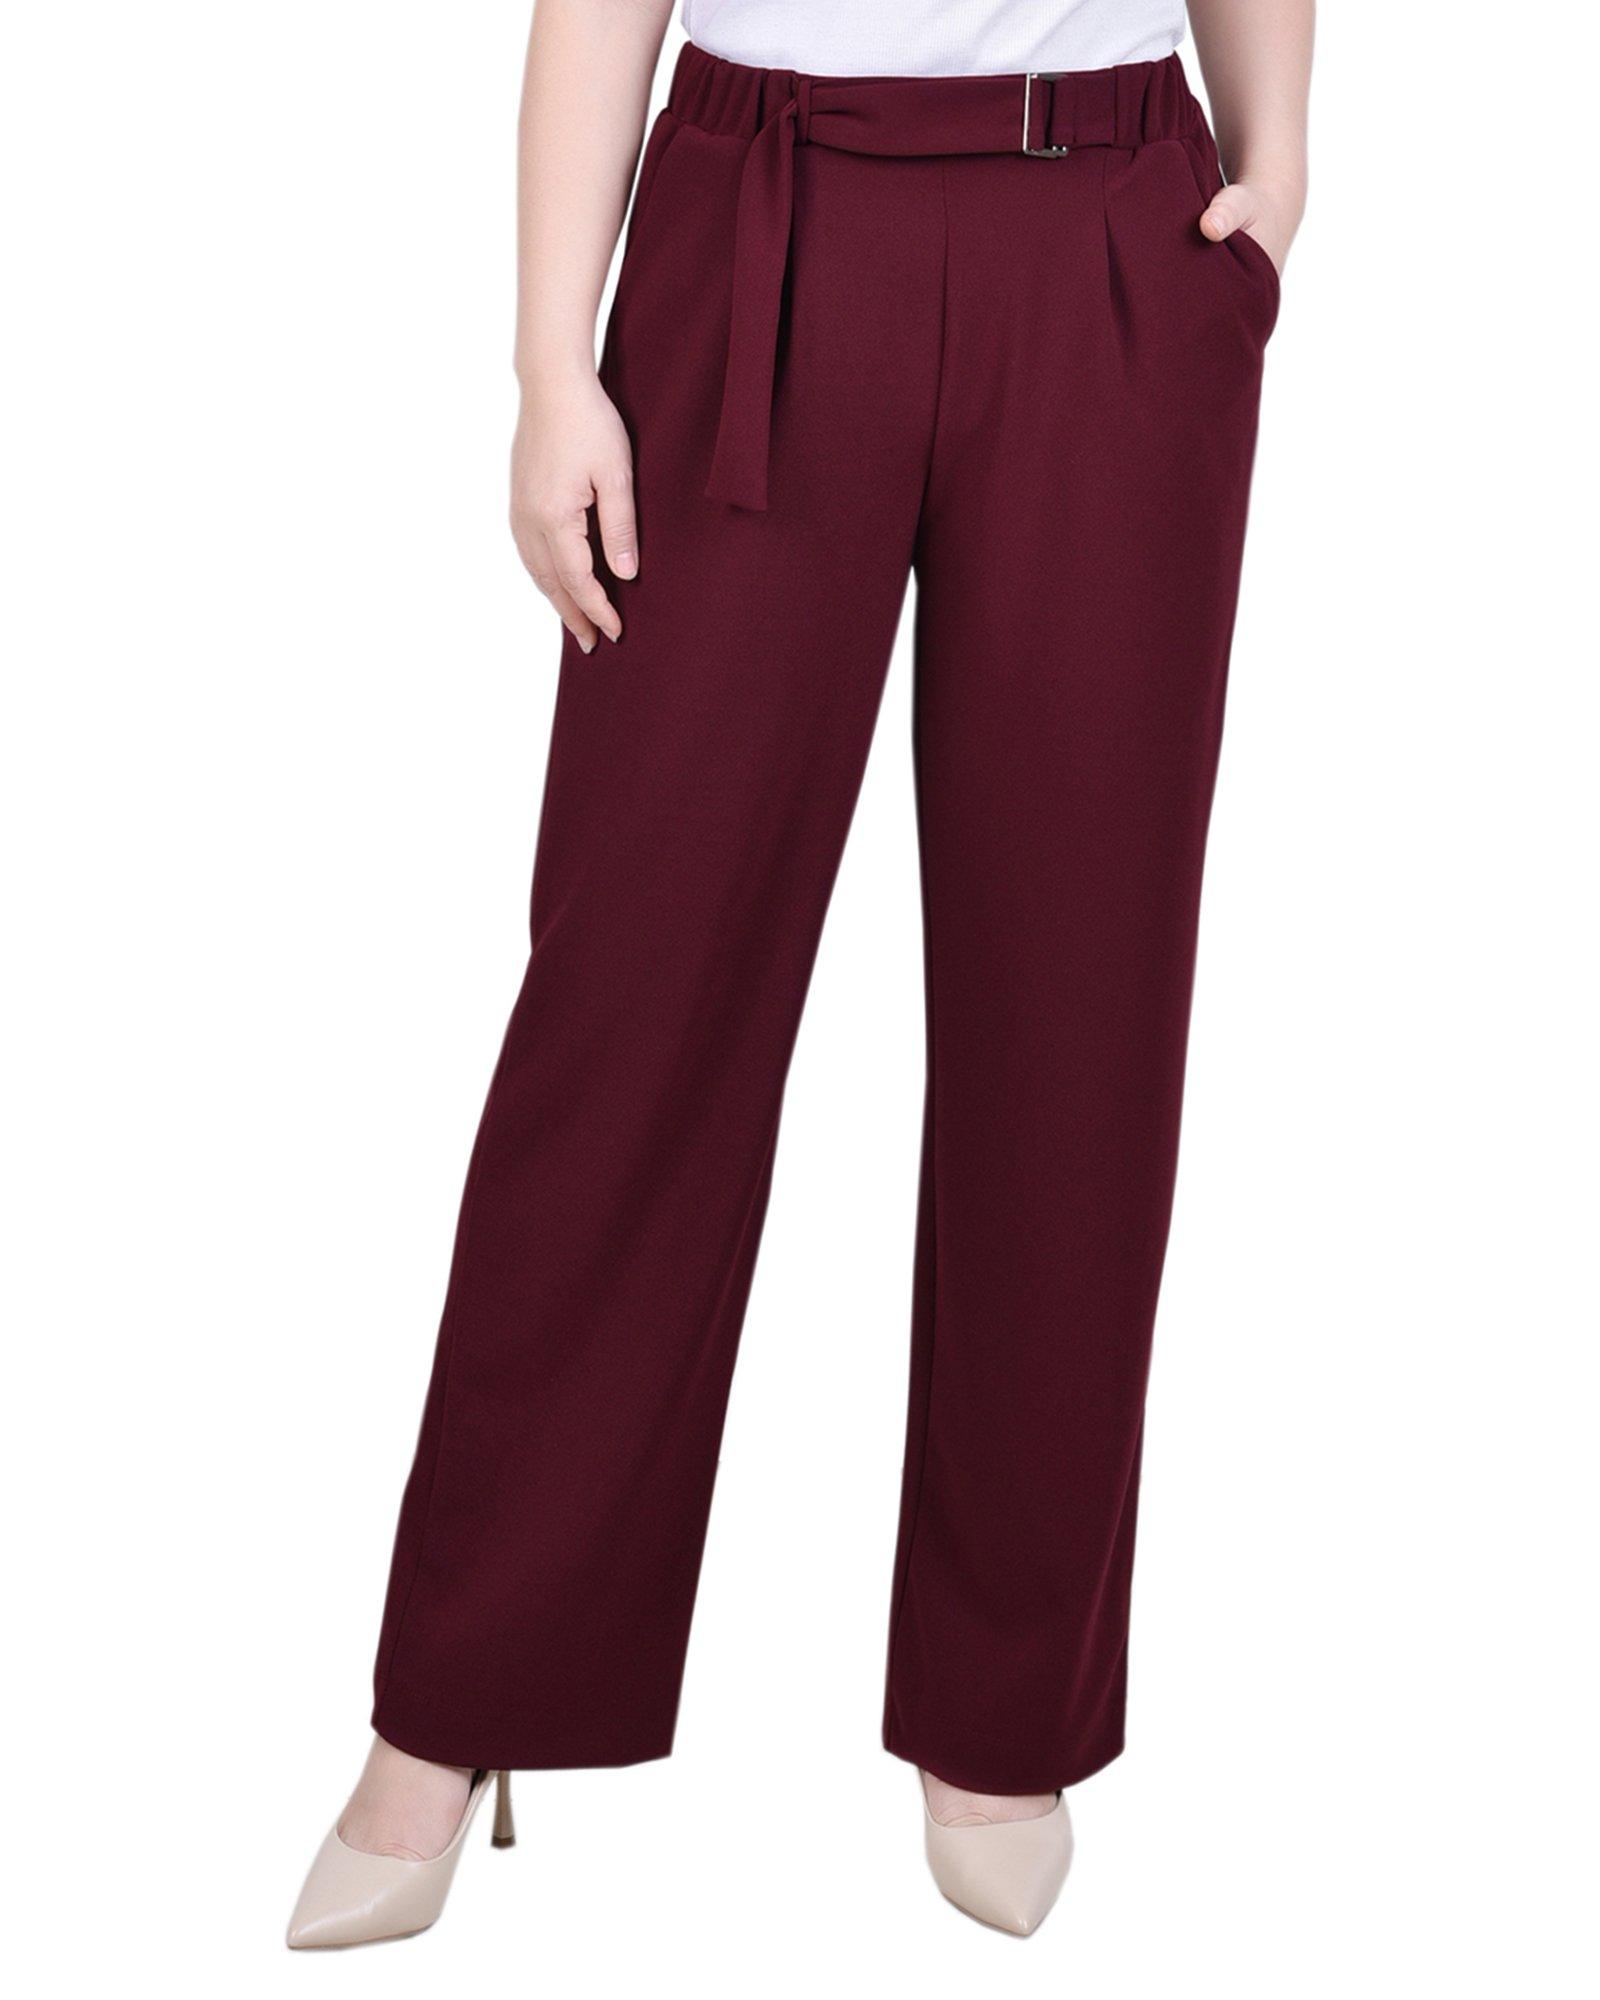 NY Collection Womens Belted Scuba Crepe Pants